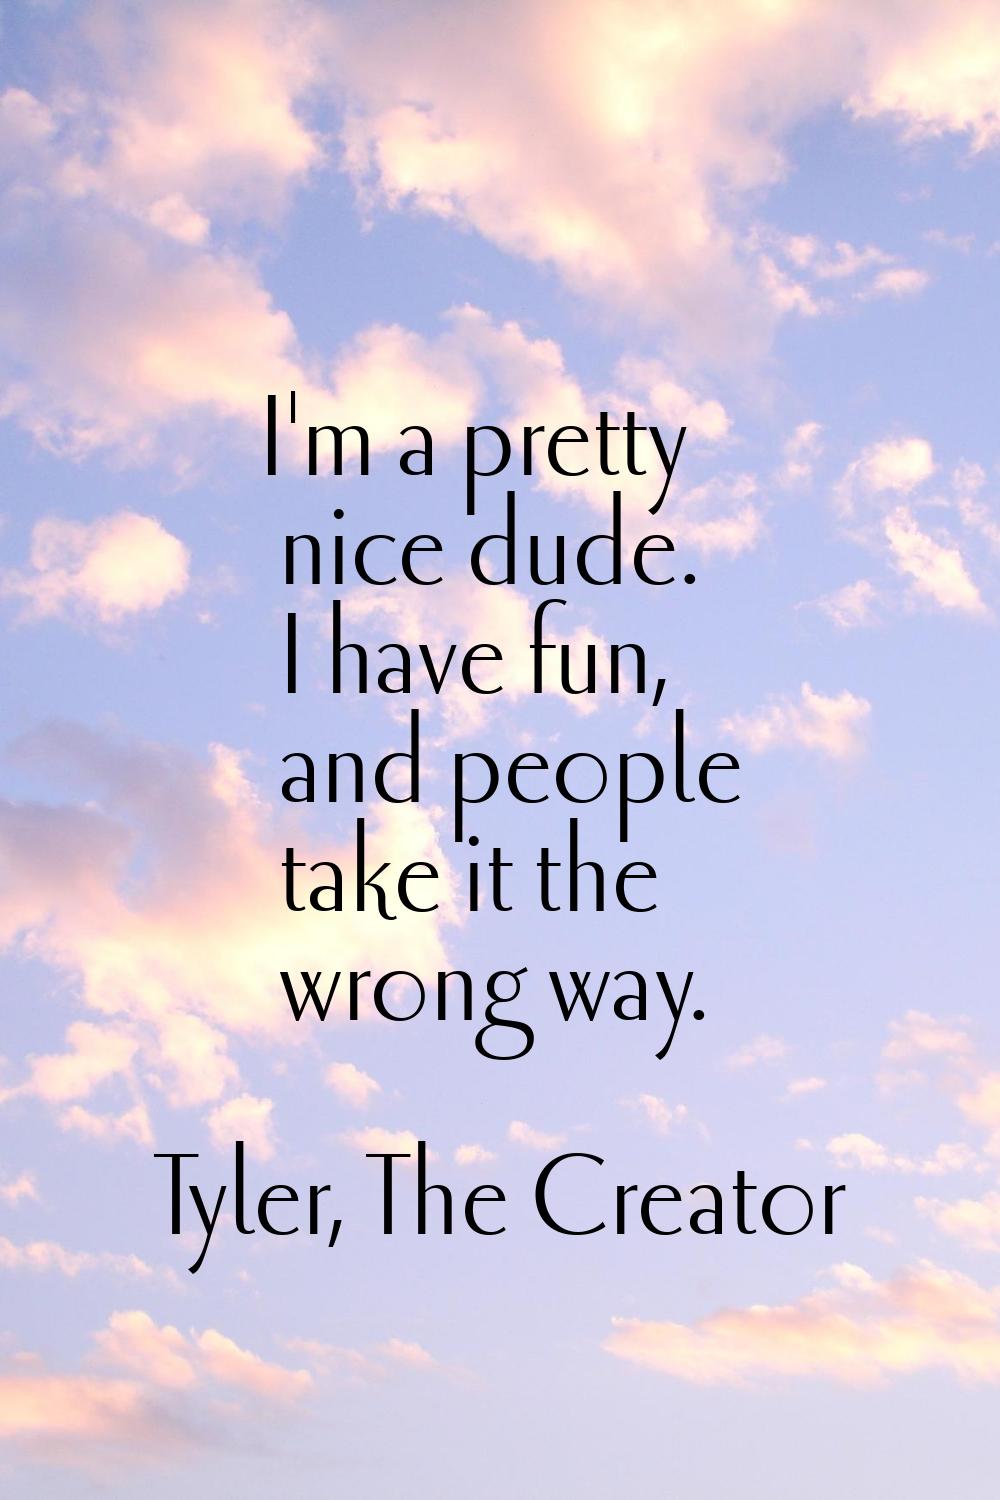 I'm a pretty nice dude. I have fun, and people take it the wrong way.